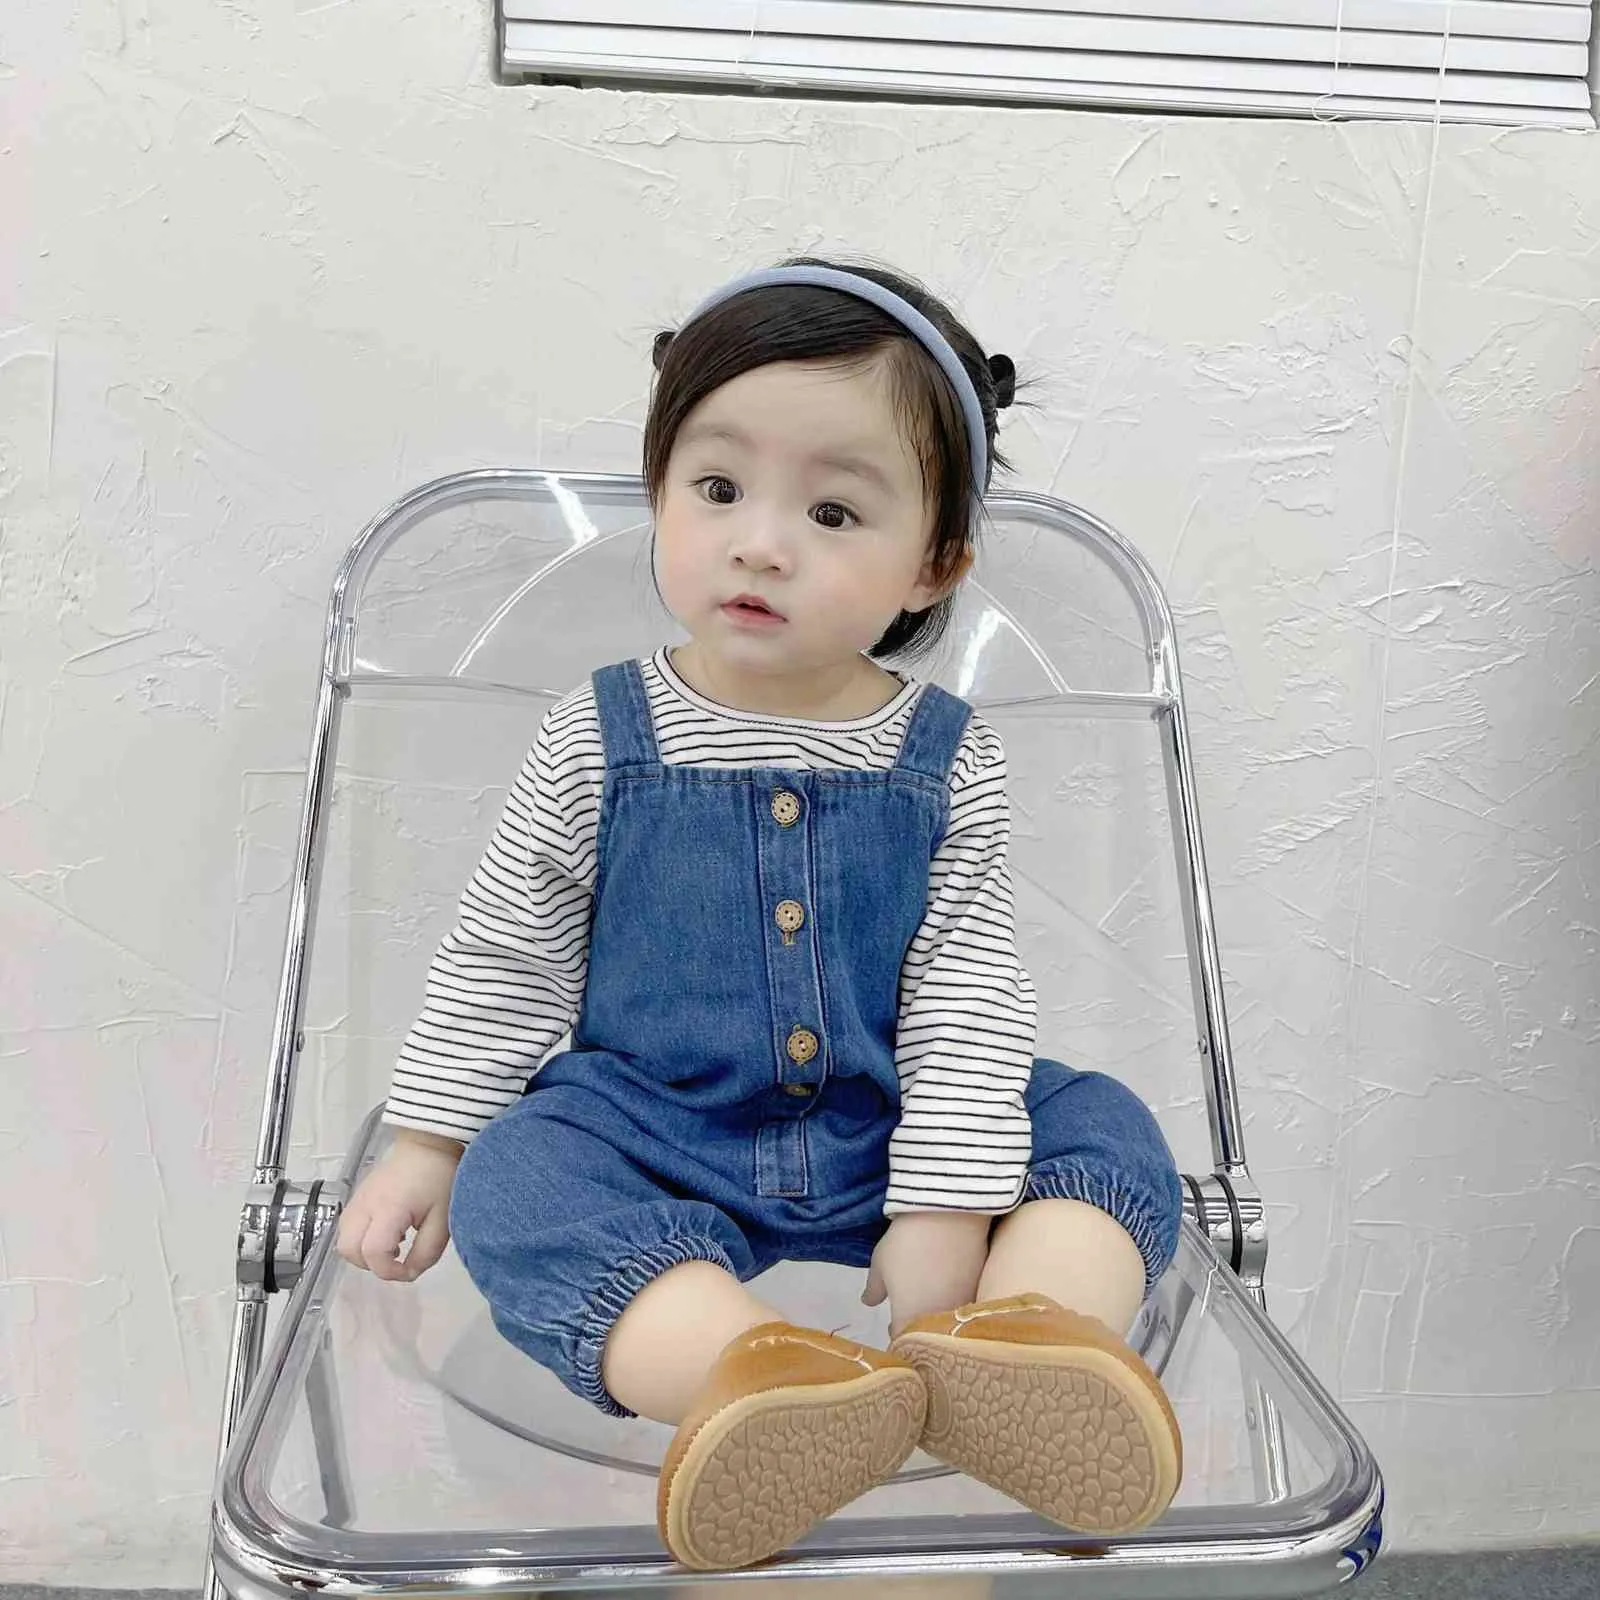 Ins Baby jumpsuit Boys Girls Denim Overal Outfit Romper born Out Vest Clothes 0 to 18months Child Jean Casual Trousers 211101